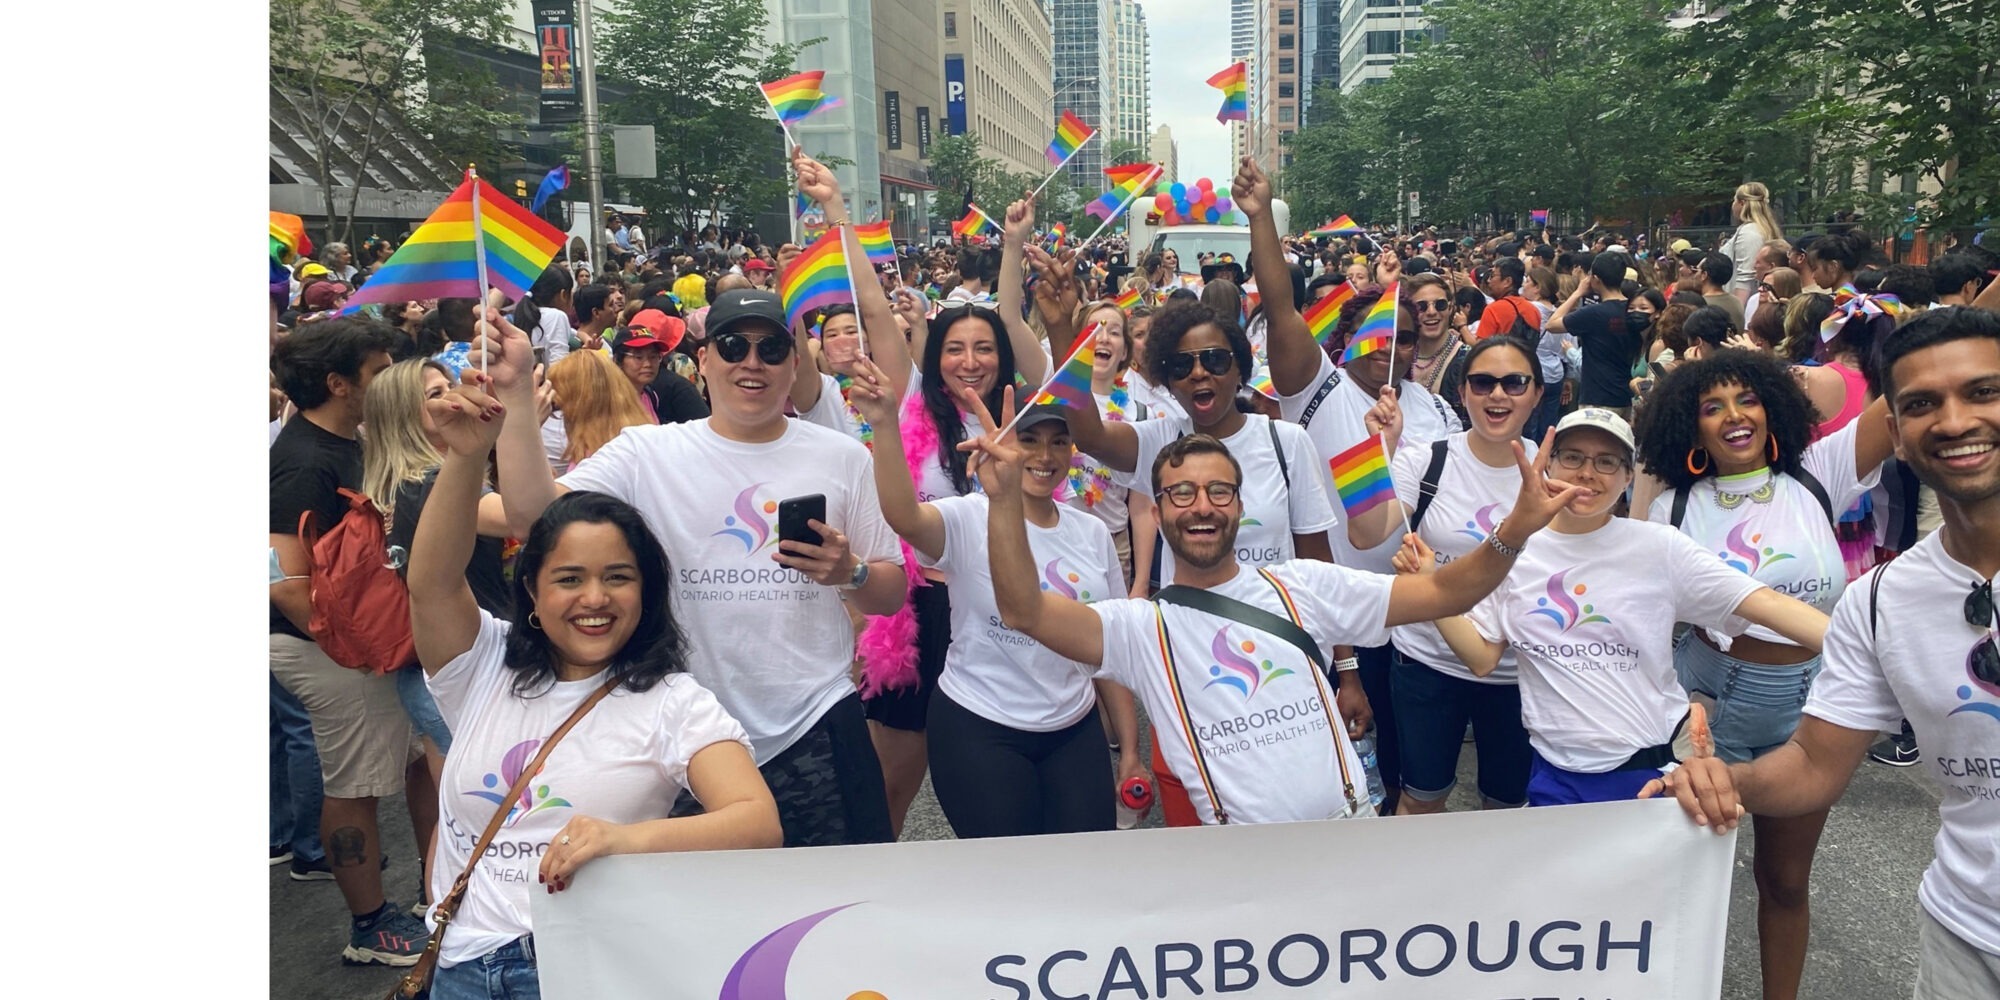 Members of the Scarborough Ontario Health Team (SOHT) hold an SOHT banner at the 2022 Pride Parade in Toronto.